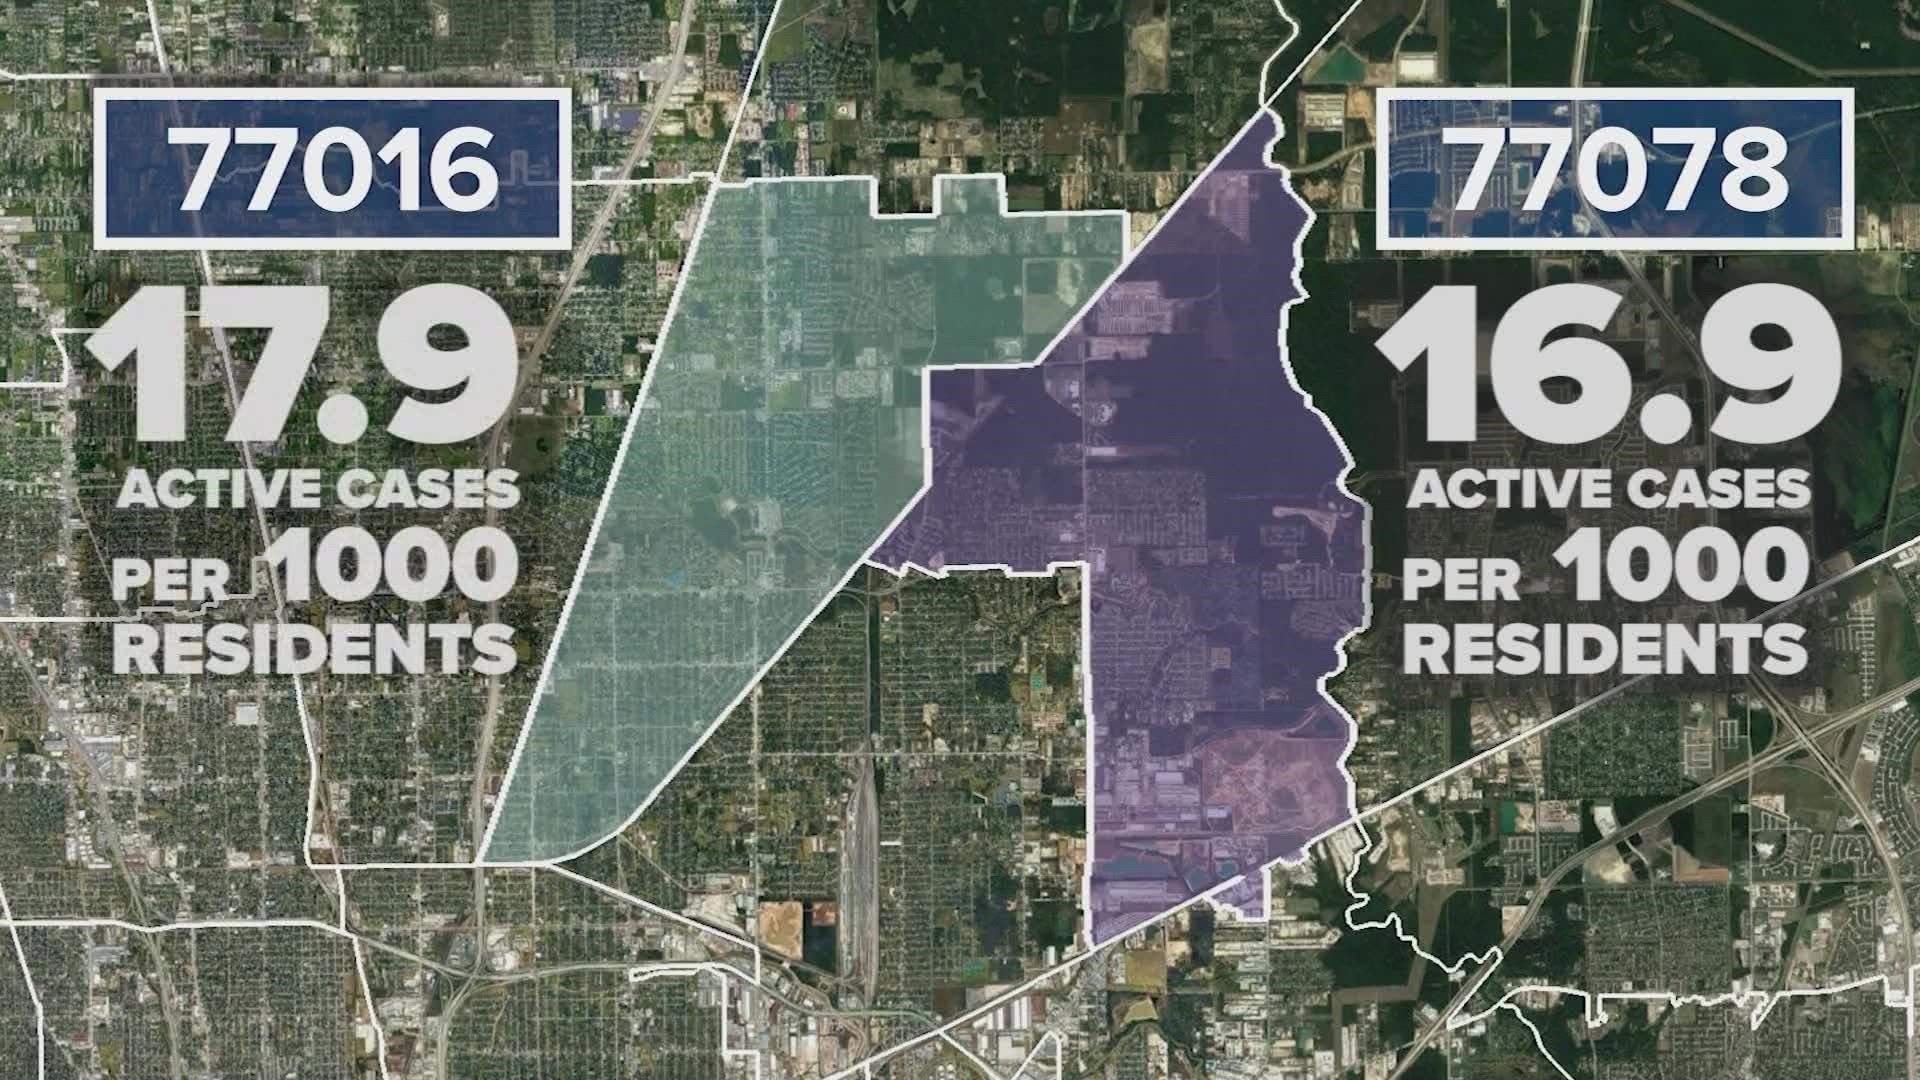 Two weeks after our first analysis, KHOU 11 crunched the data in 151 area ZIP codes. Conroe is still struggling, but now two Houston neighborhoods are, too.